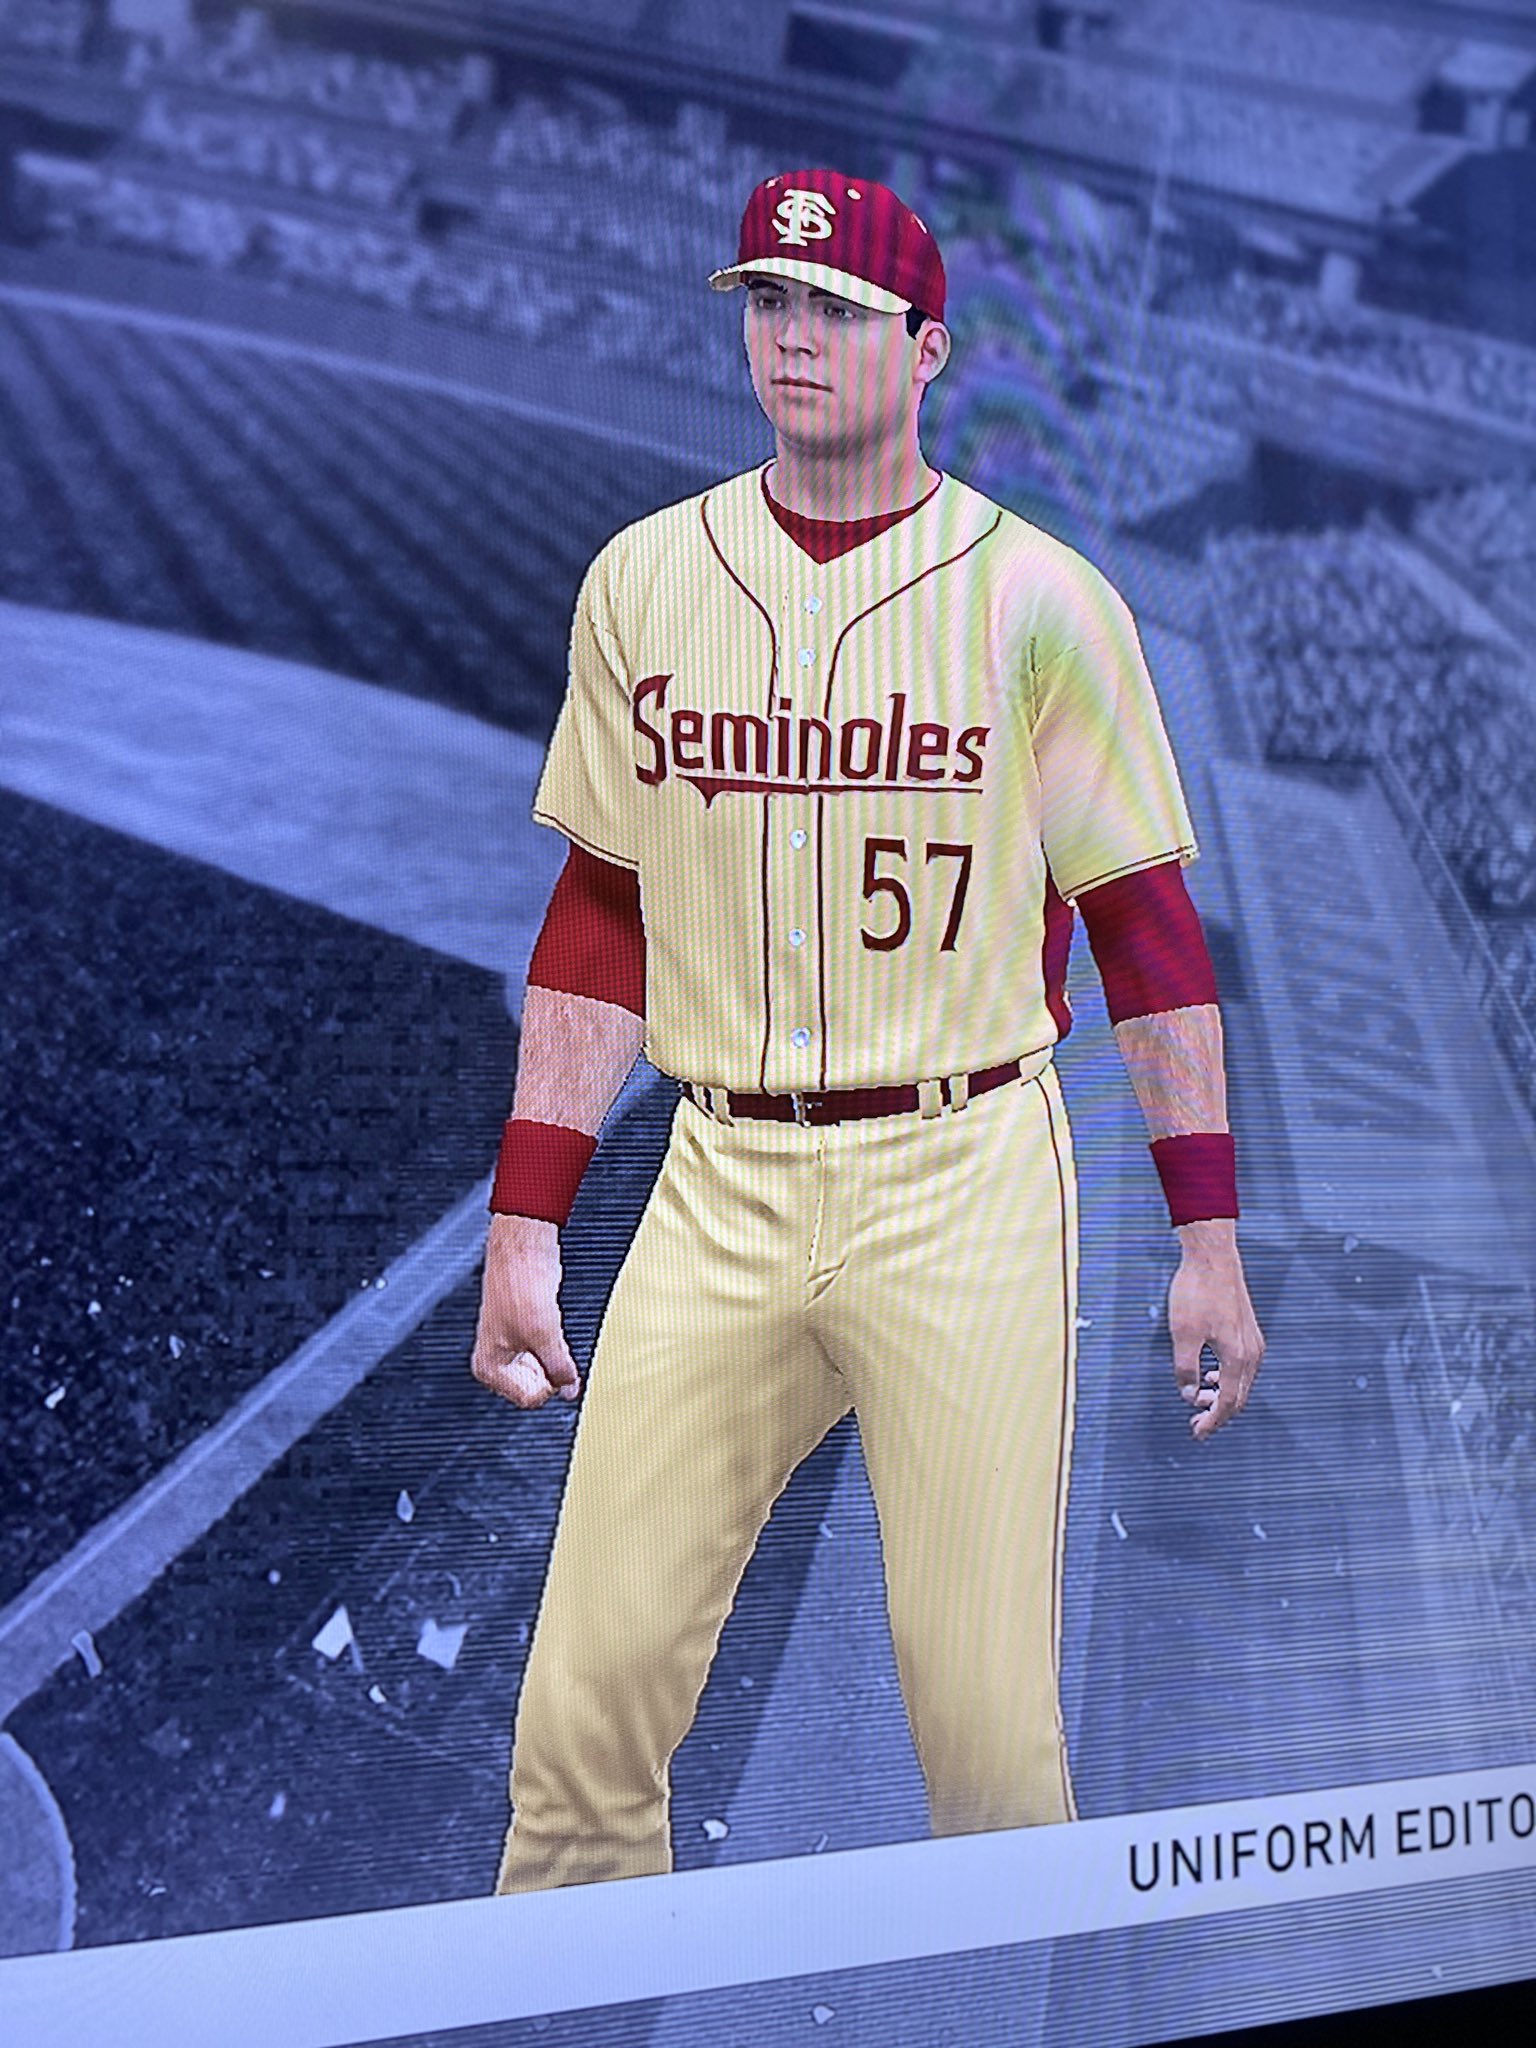 rådgive spørge søsyge FSU Baseball on X: "🔥🥵 Which one would you play with?" / X